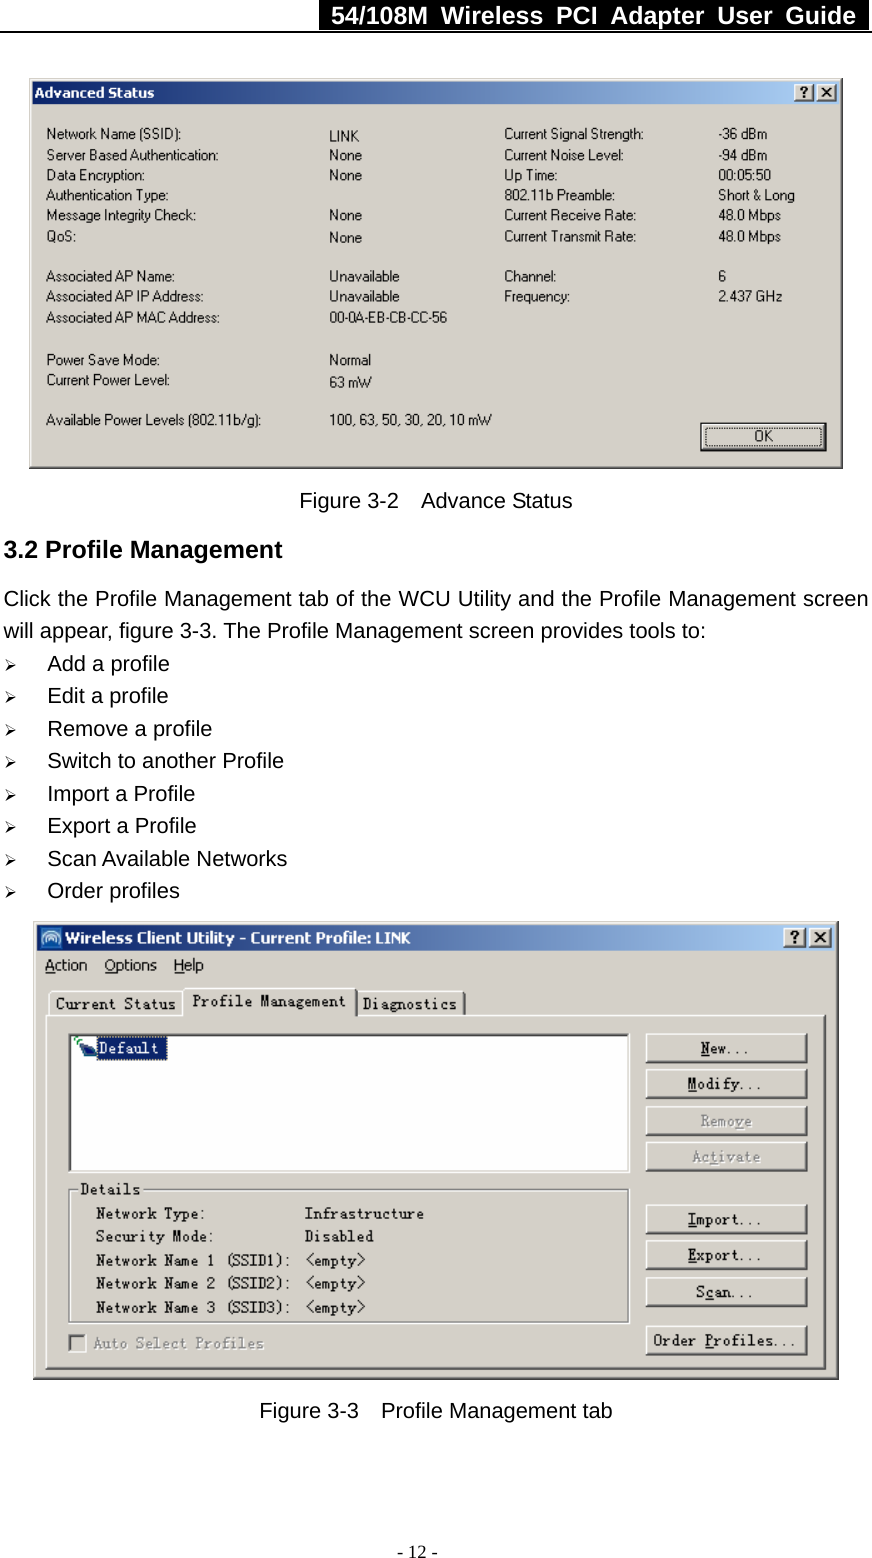   54/108M Wireless PCI Adapter User Guide  - 12 -  Figure 3-2  Advance Status 3.2 Profile Management Click the Profile Management tab of the WCU Utility and the Profile Management screen will appear, figure 3-3. The Profile Management screen provides tools to: ¾ Add a profile ¾ Edit a profile ¾ Remove a profile ¾ Switch to another Profile ¾ Import a Profile ¾ Export a Profile ¾ Scan Available Networks ¾ Order profiles  Figure 3-3    Profile Management tab 